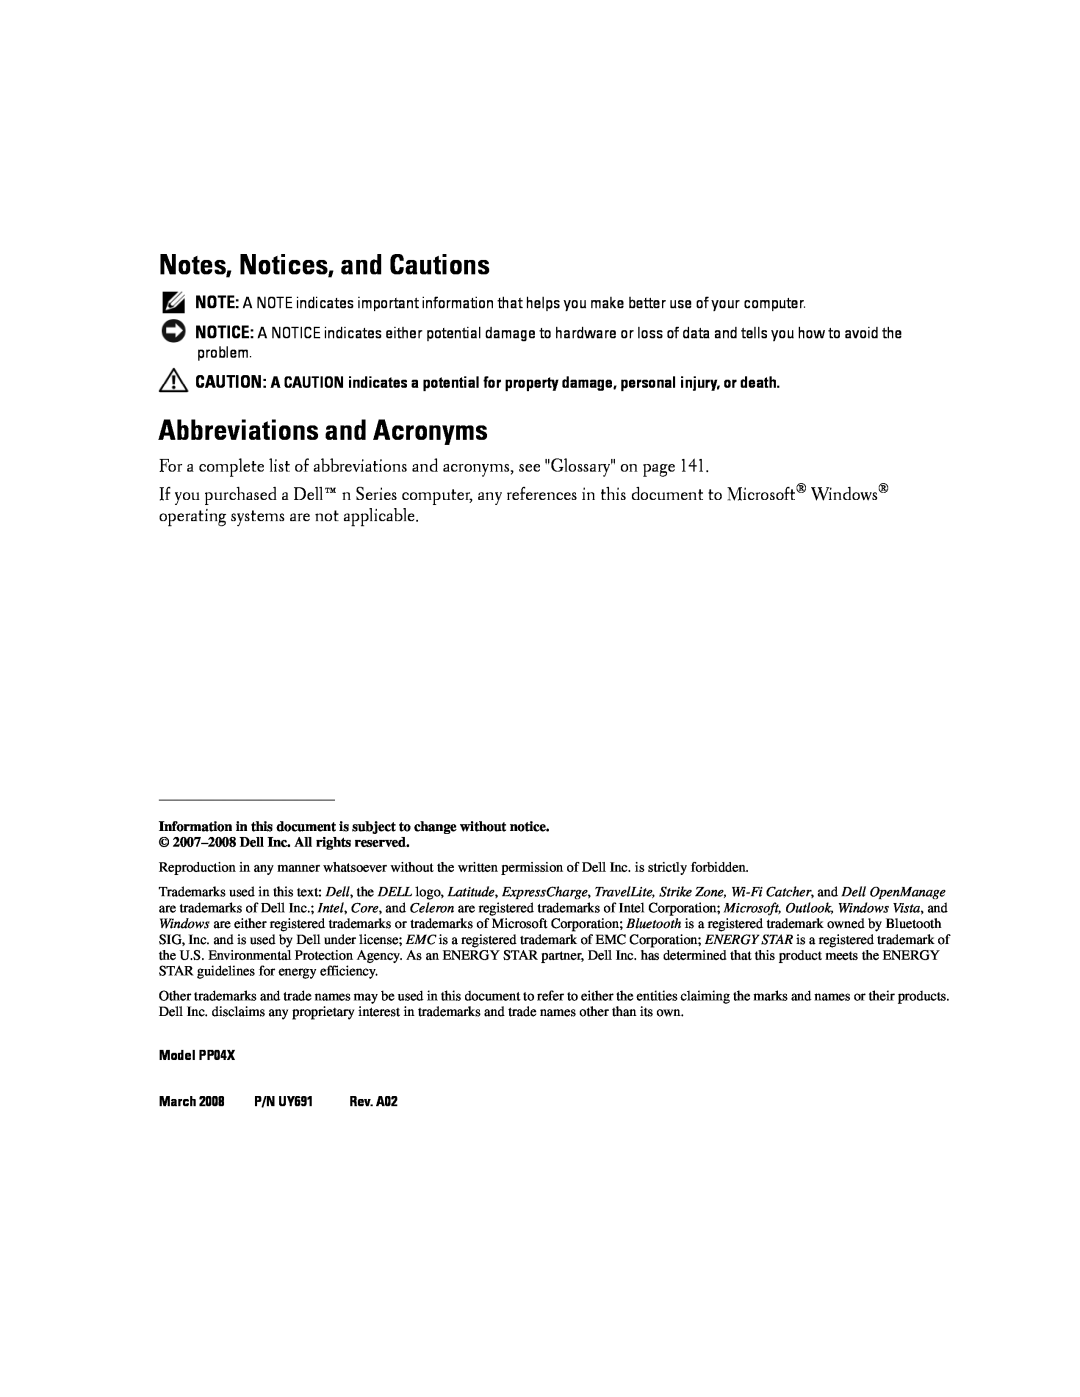 Dell PP04X, D830 manual Notes, Notices, and Cautions, Abbreviations and Acronyms, Rev. A02 